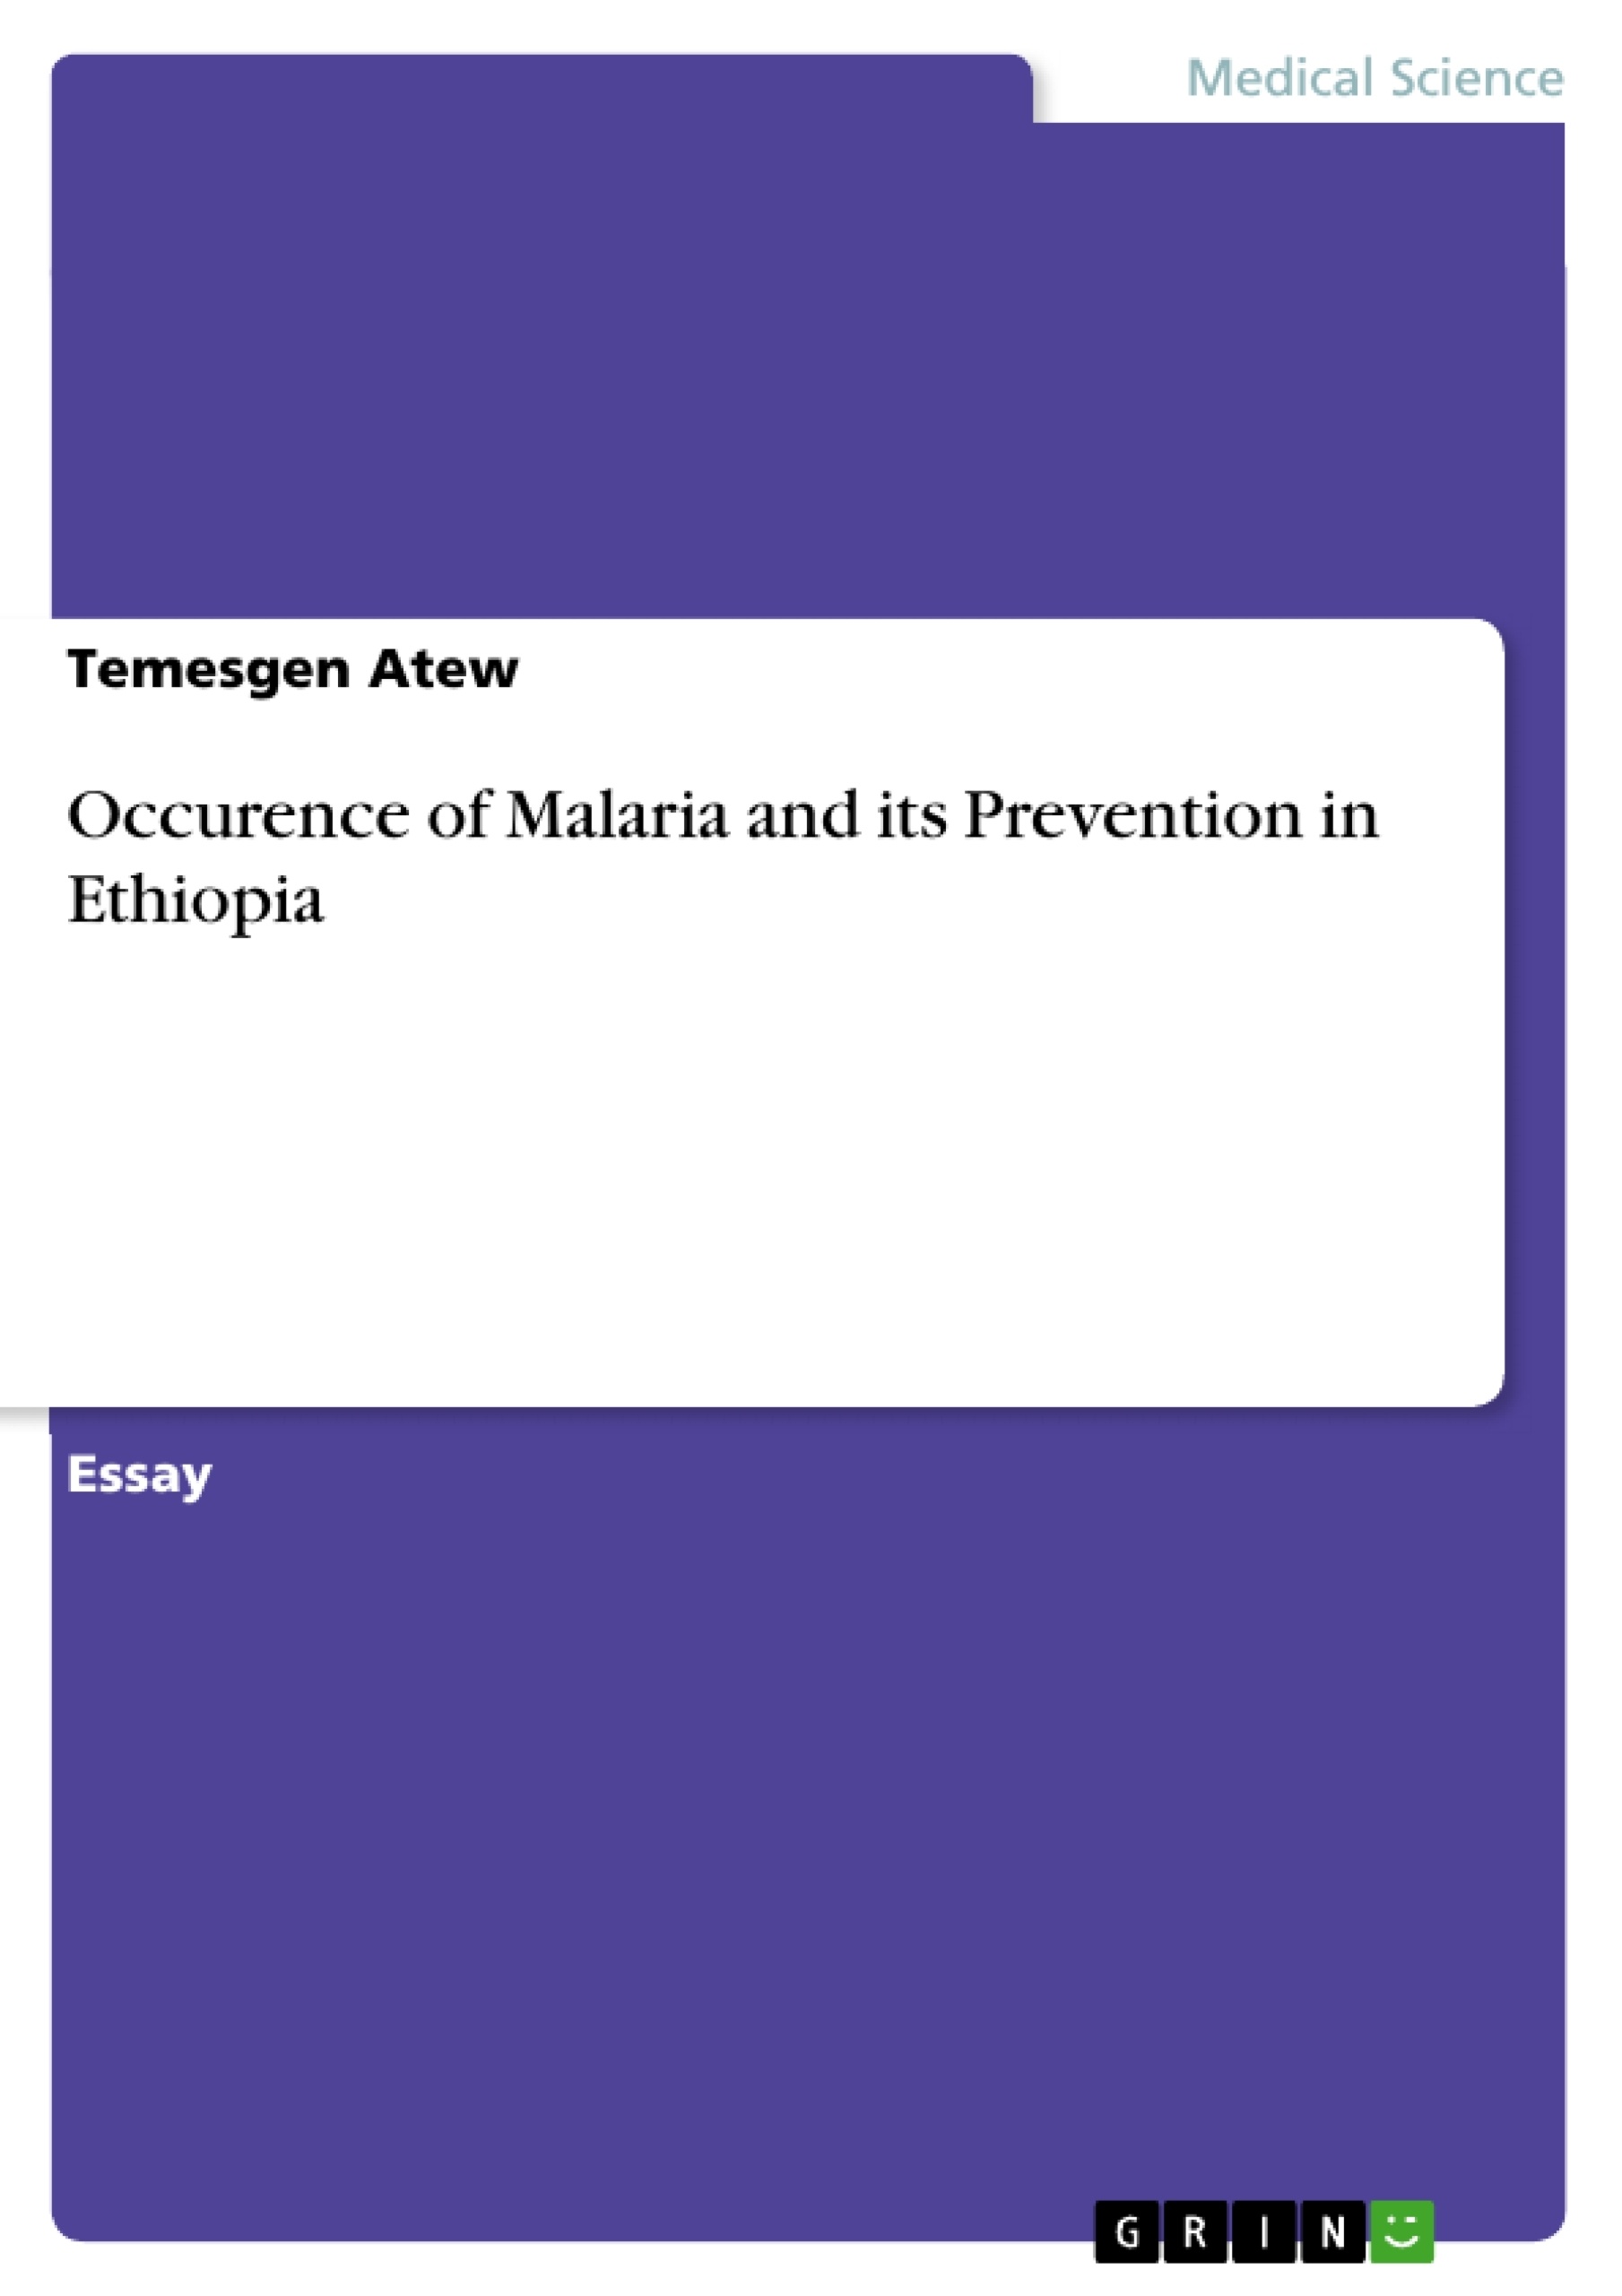 Titel: Occurence of Malaria and its Prevention in Ethiopia